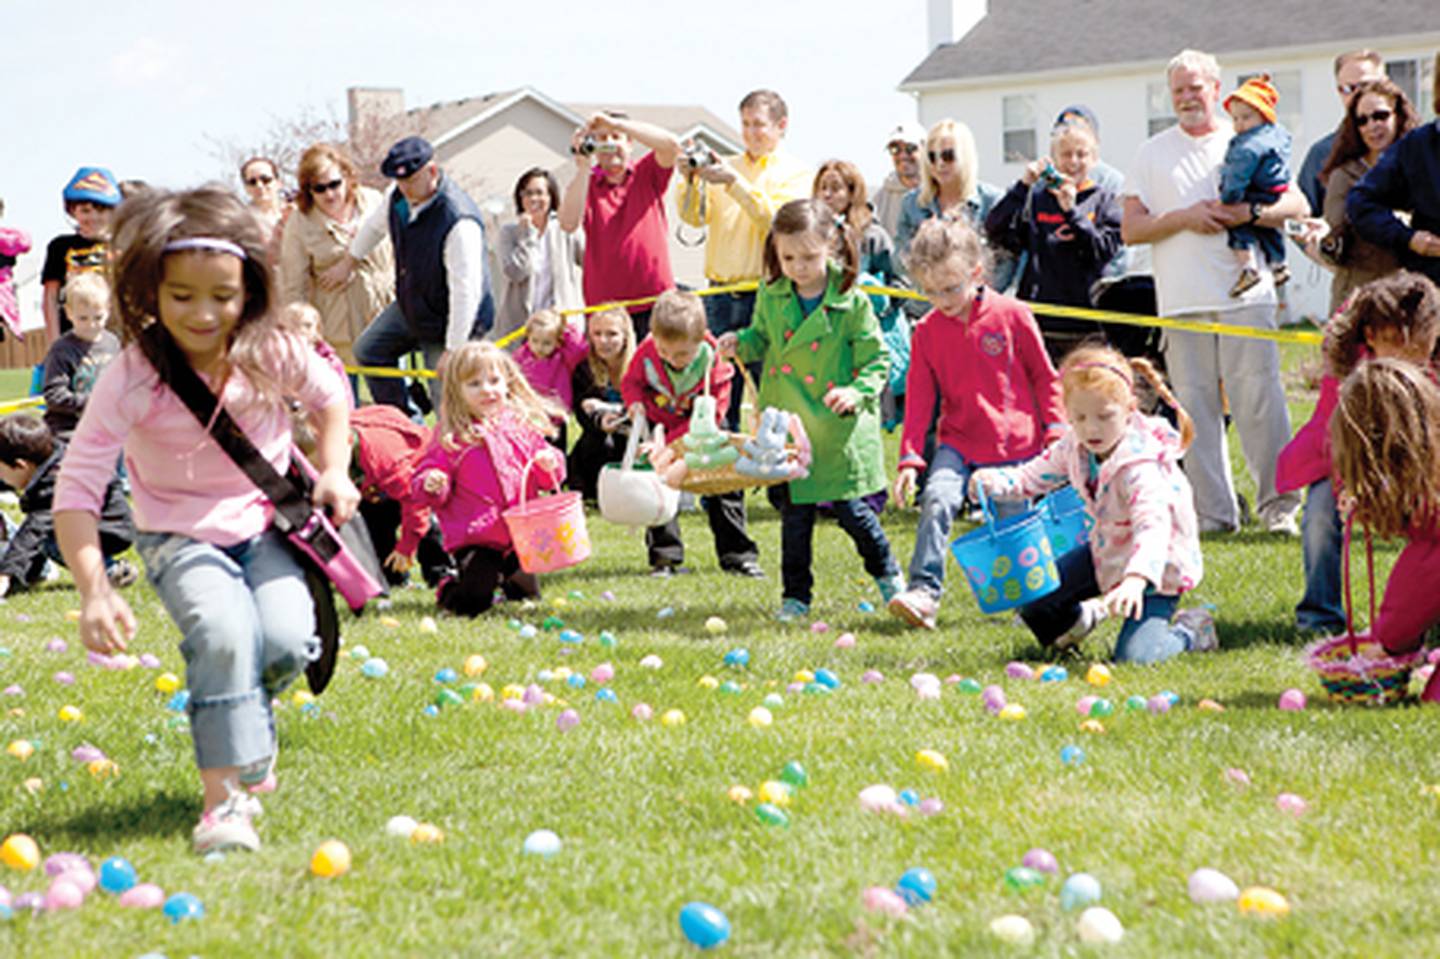 Children will have more than 10,000 to find during the eighth annual Hippity-Hop Easter Egg Hunt Saturday, April 7, at the Timbers of Shorewood.